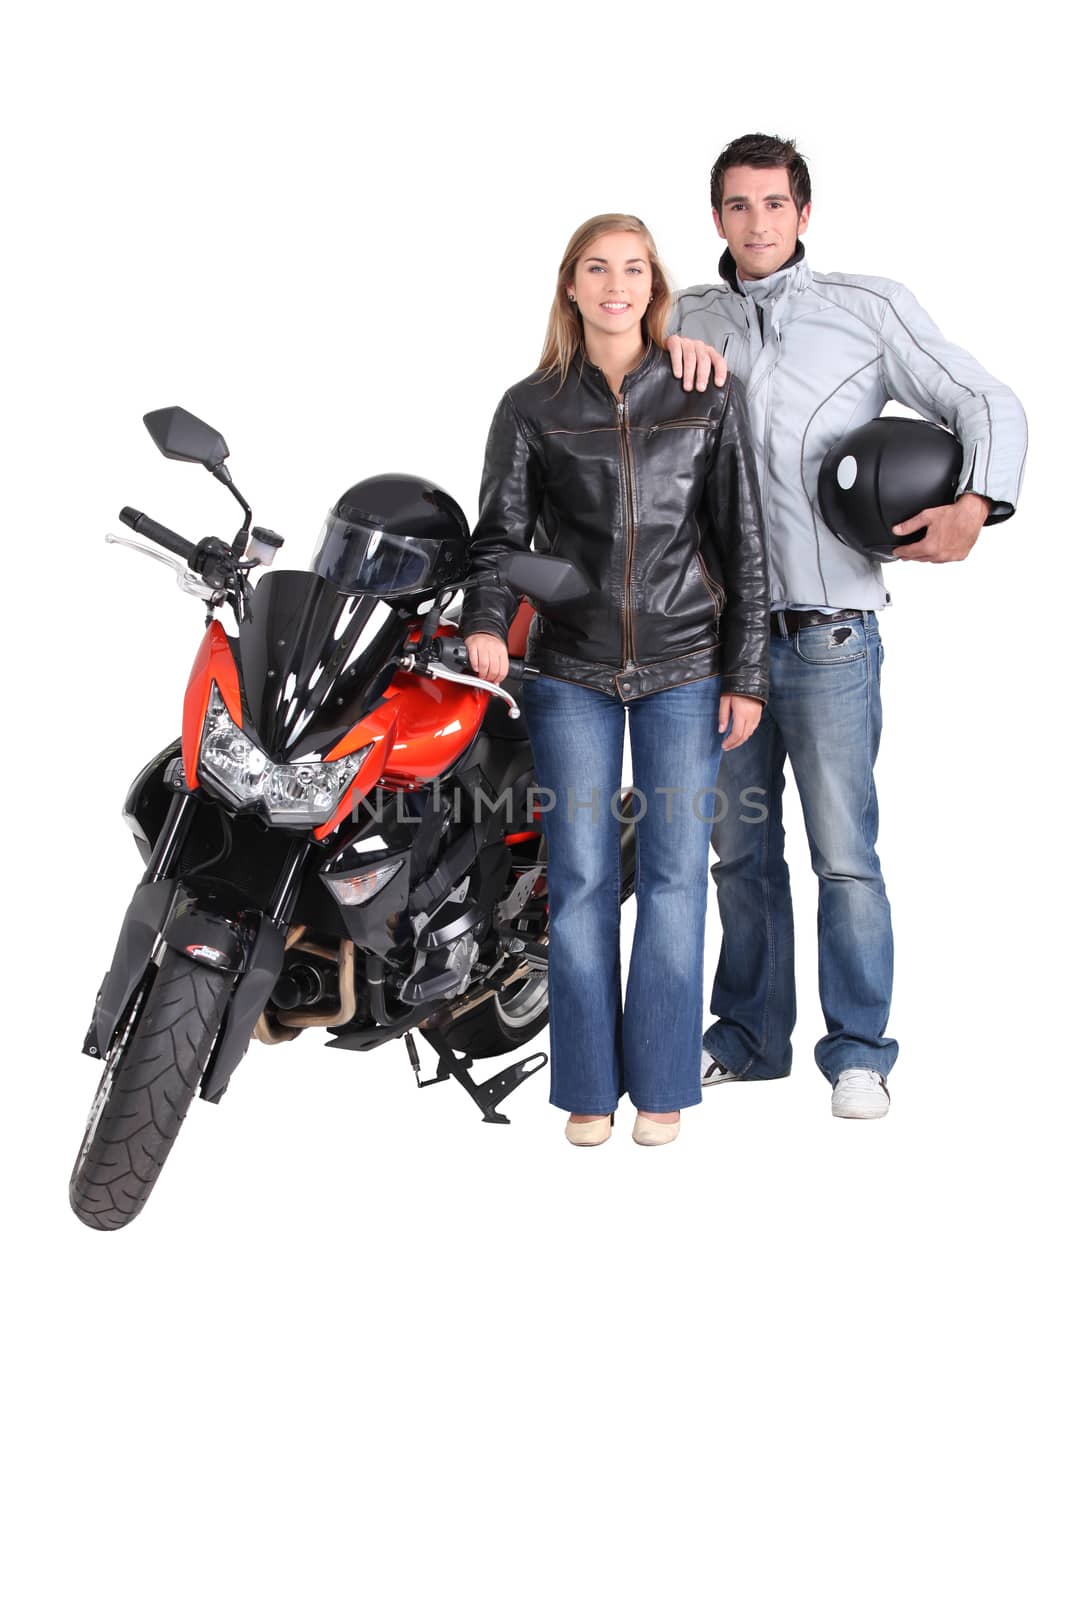 Biking couple with a red motorcycle by phovoir